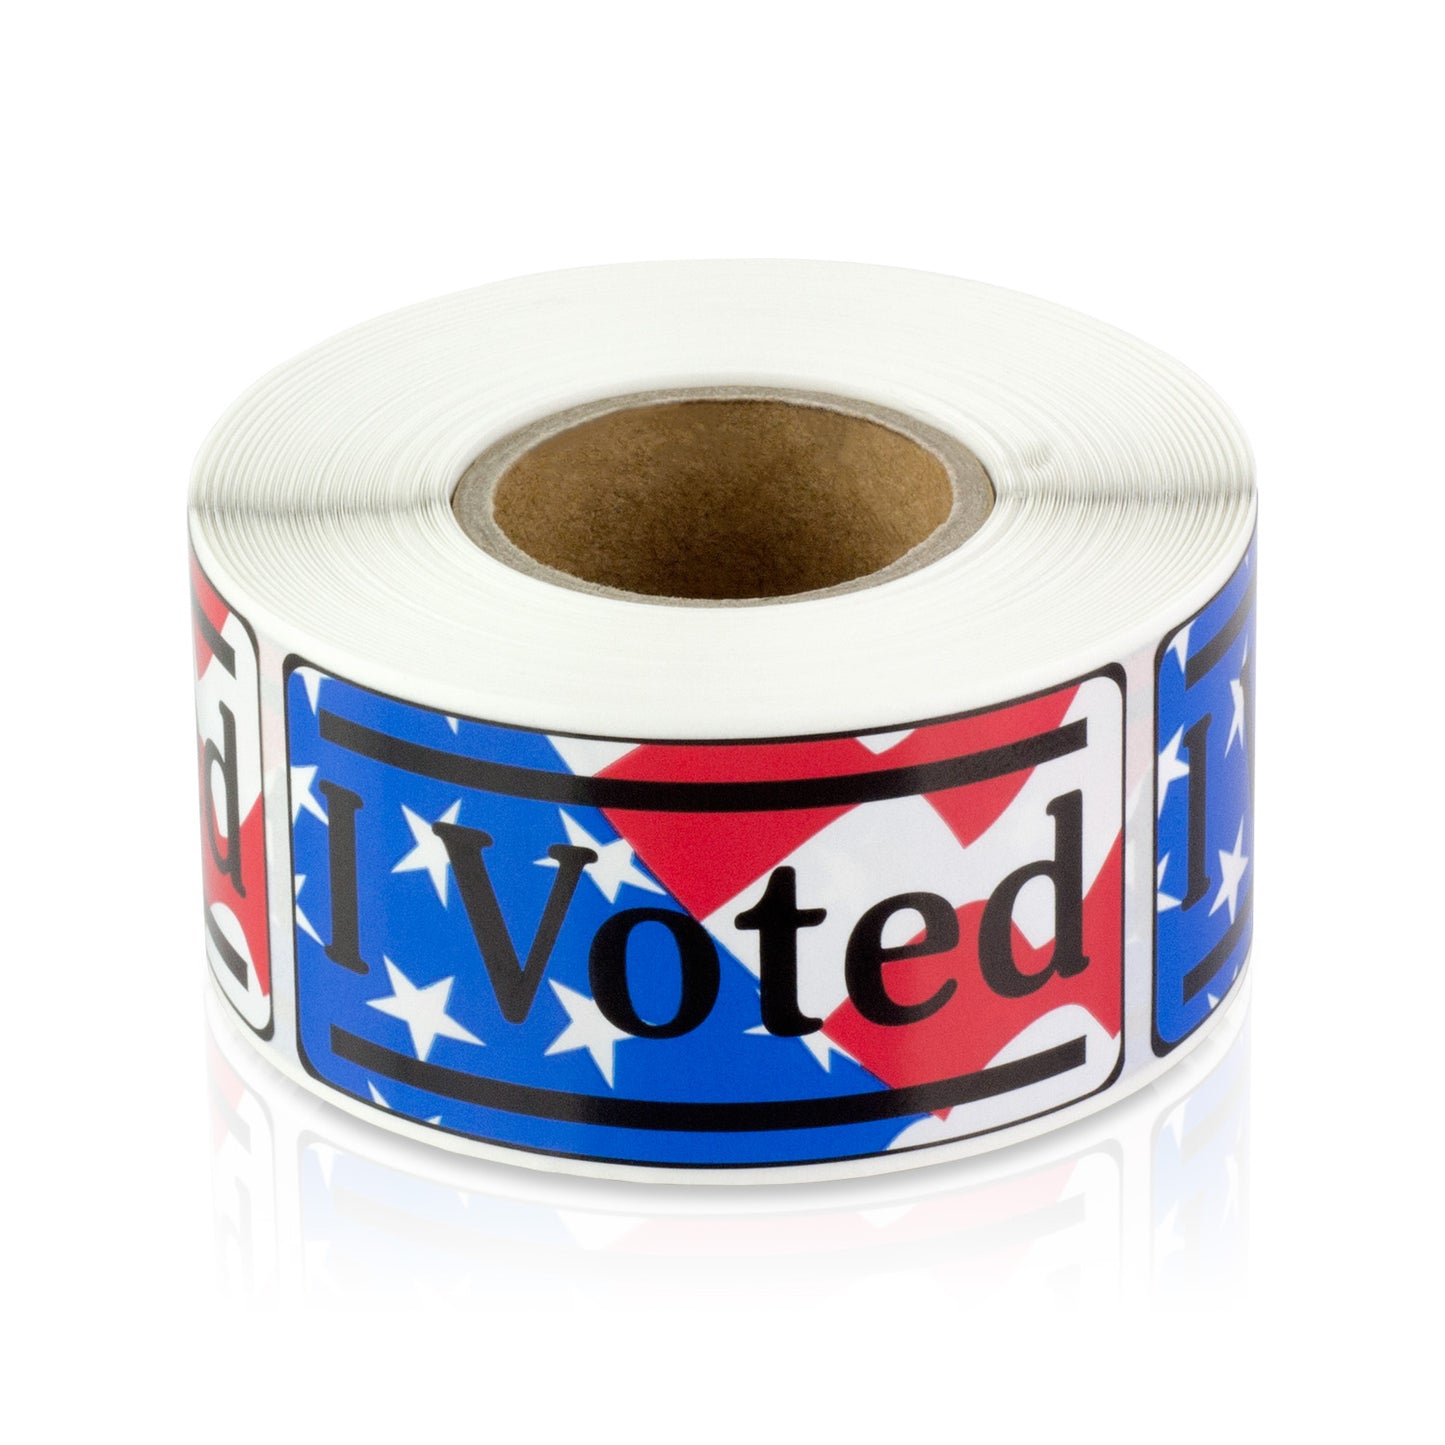 2 x 1 inch | Elections & Voting: I Voted Stickers